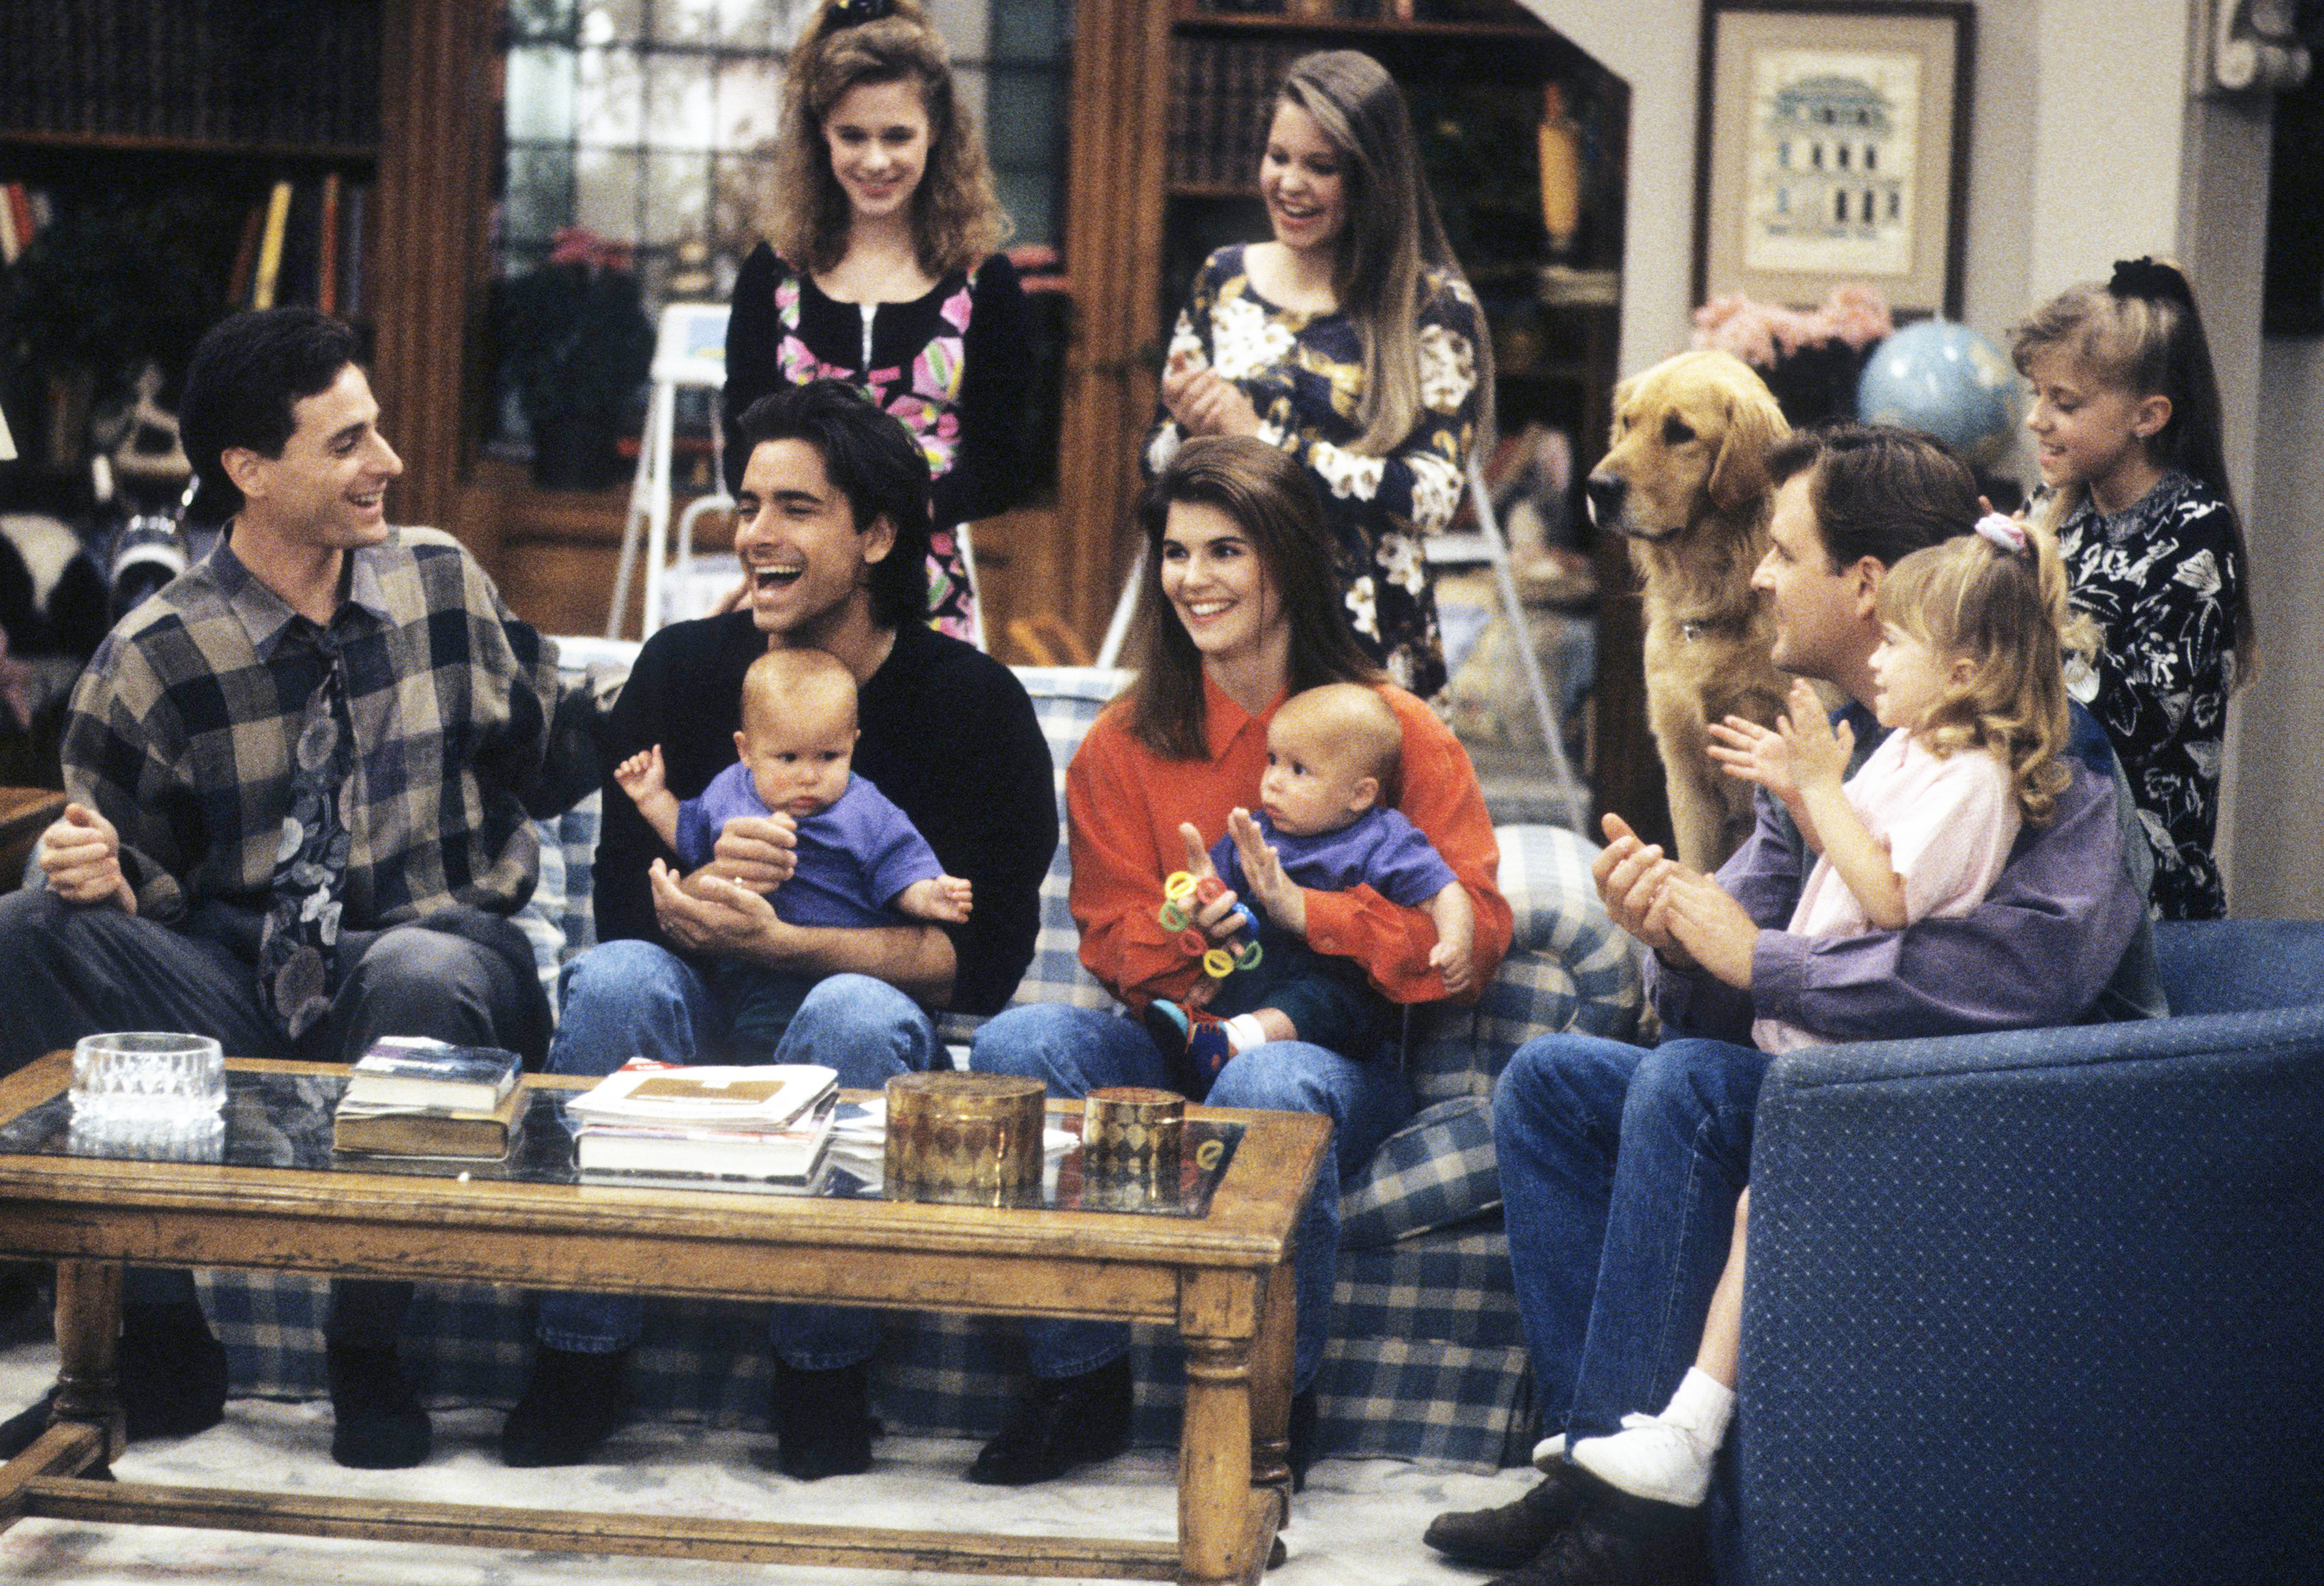 The Iconic ‘Full House’ Home Is up for Sale. See What It REALLY Looks Like Inside